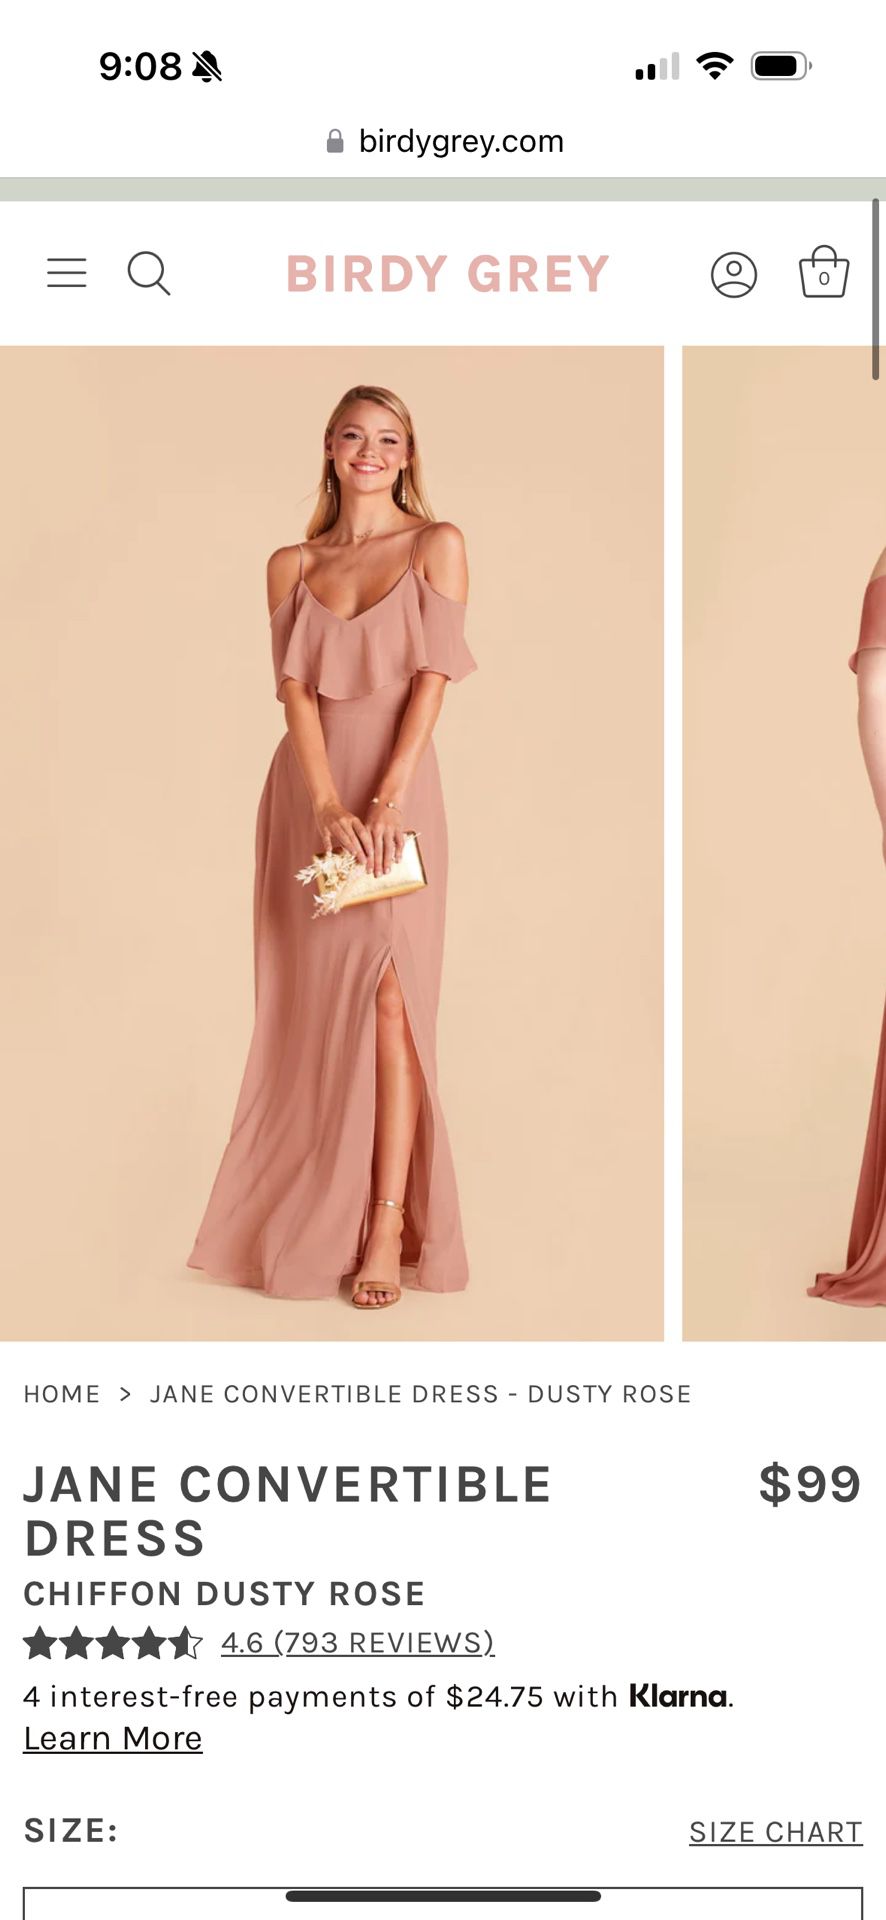 Birdy Grey- Dusty Rose Jane convertible dress ! Worn once as a Bridesmaid! 